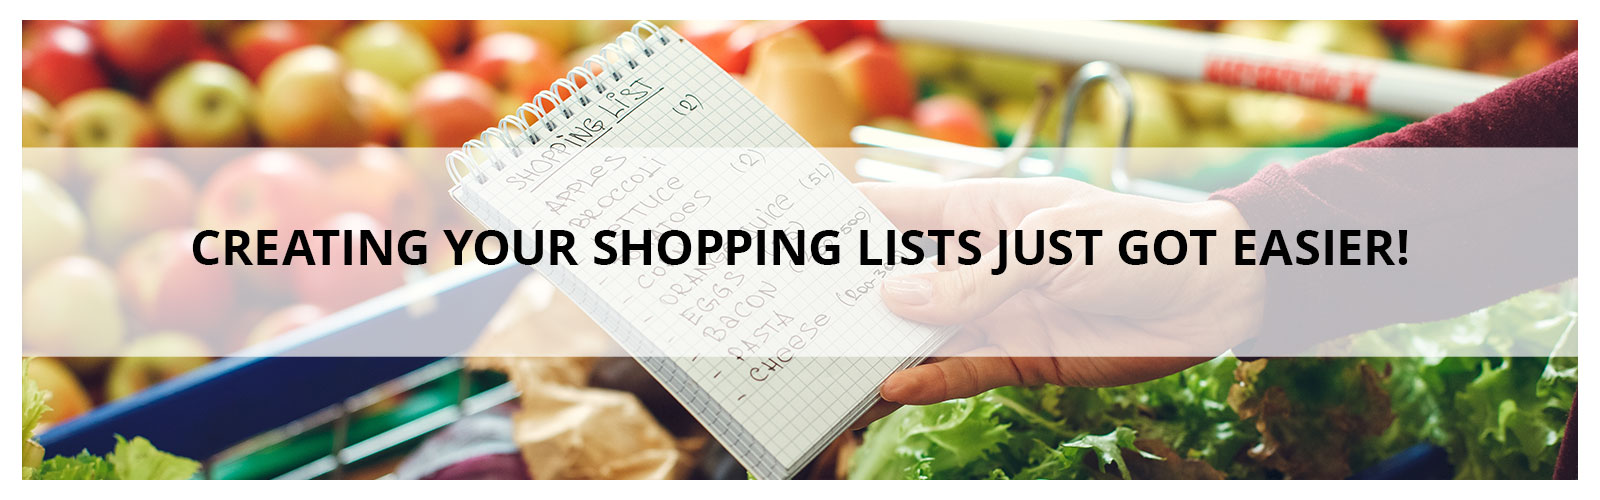 Shopping-List_Simple-Banner-Component_2.jpg